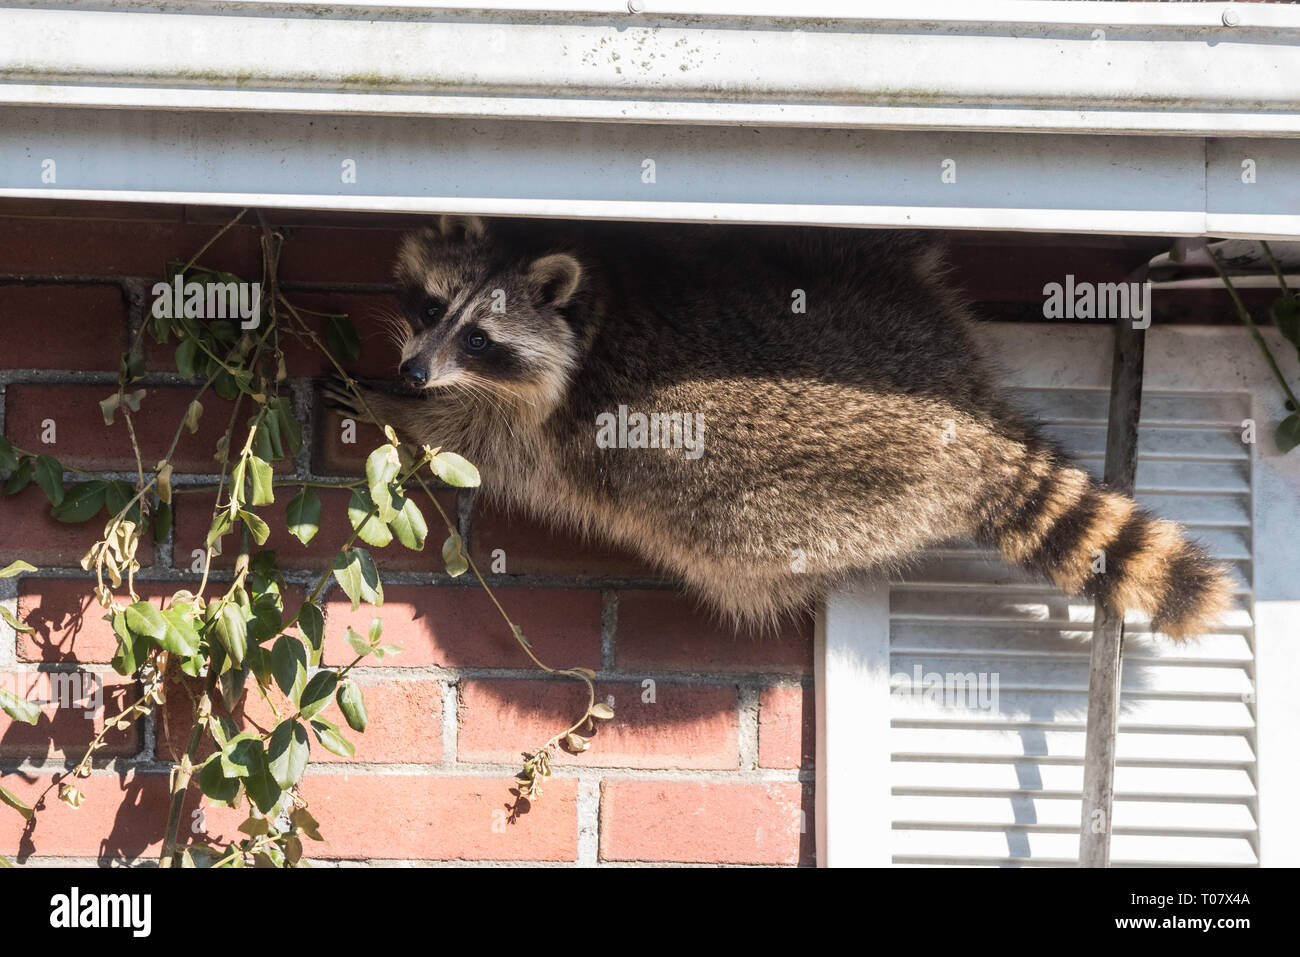 A raccoon scales someone's house in the Upper Beaches neighbourhood of Toronto, Canada, a city notorious for its urban raccoon population. Stock Photo